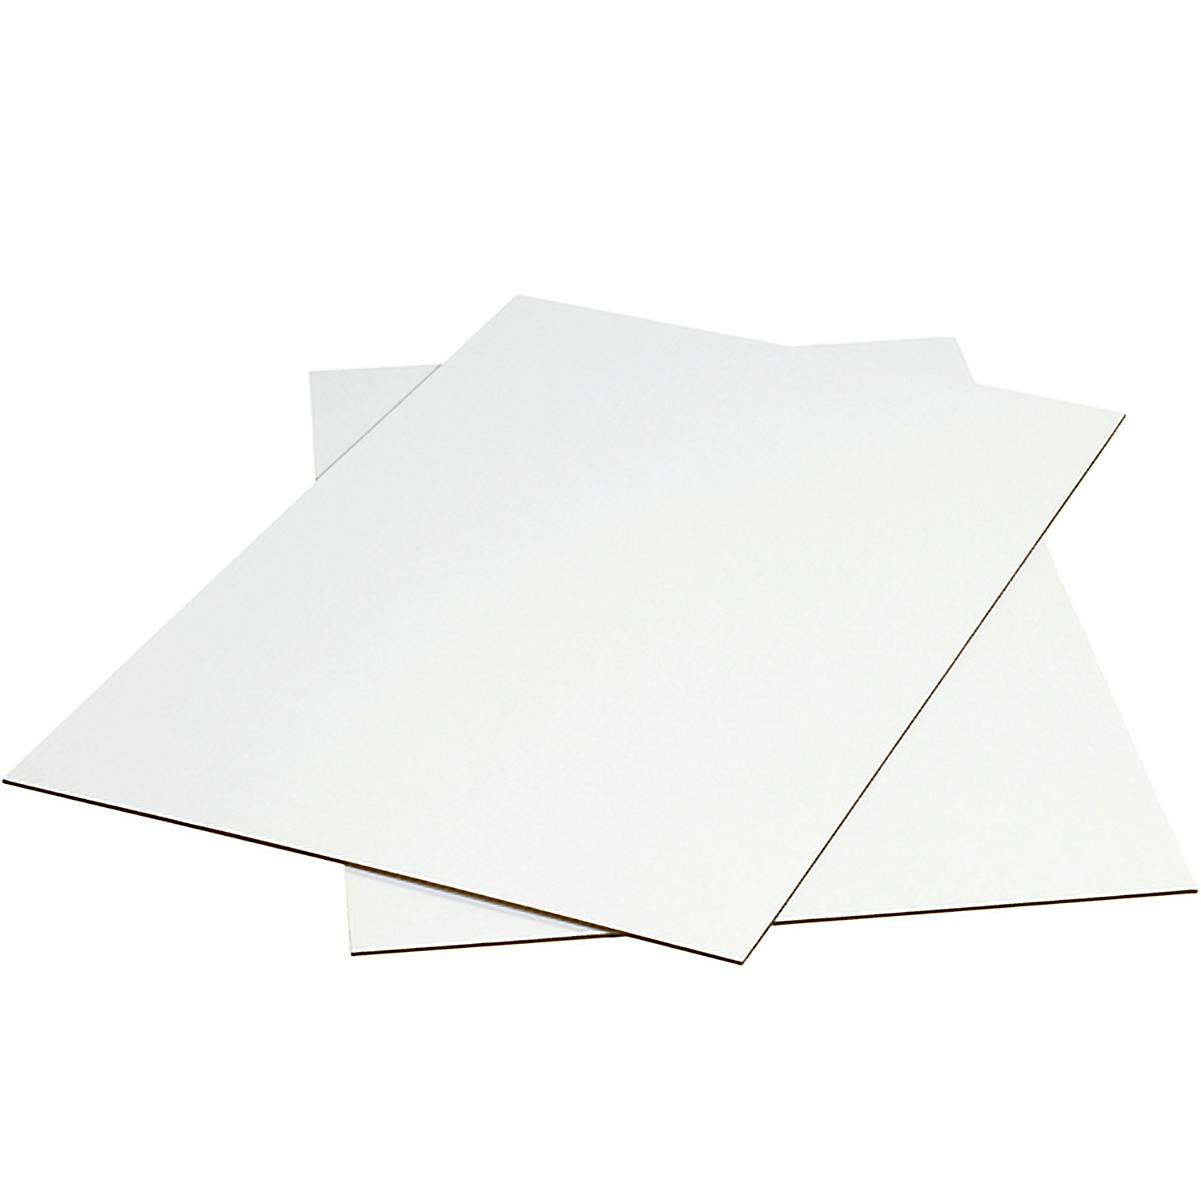 12.5 x 12.5 Corrugated Pad Sold in stacks of 100 – 3D Corrugated